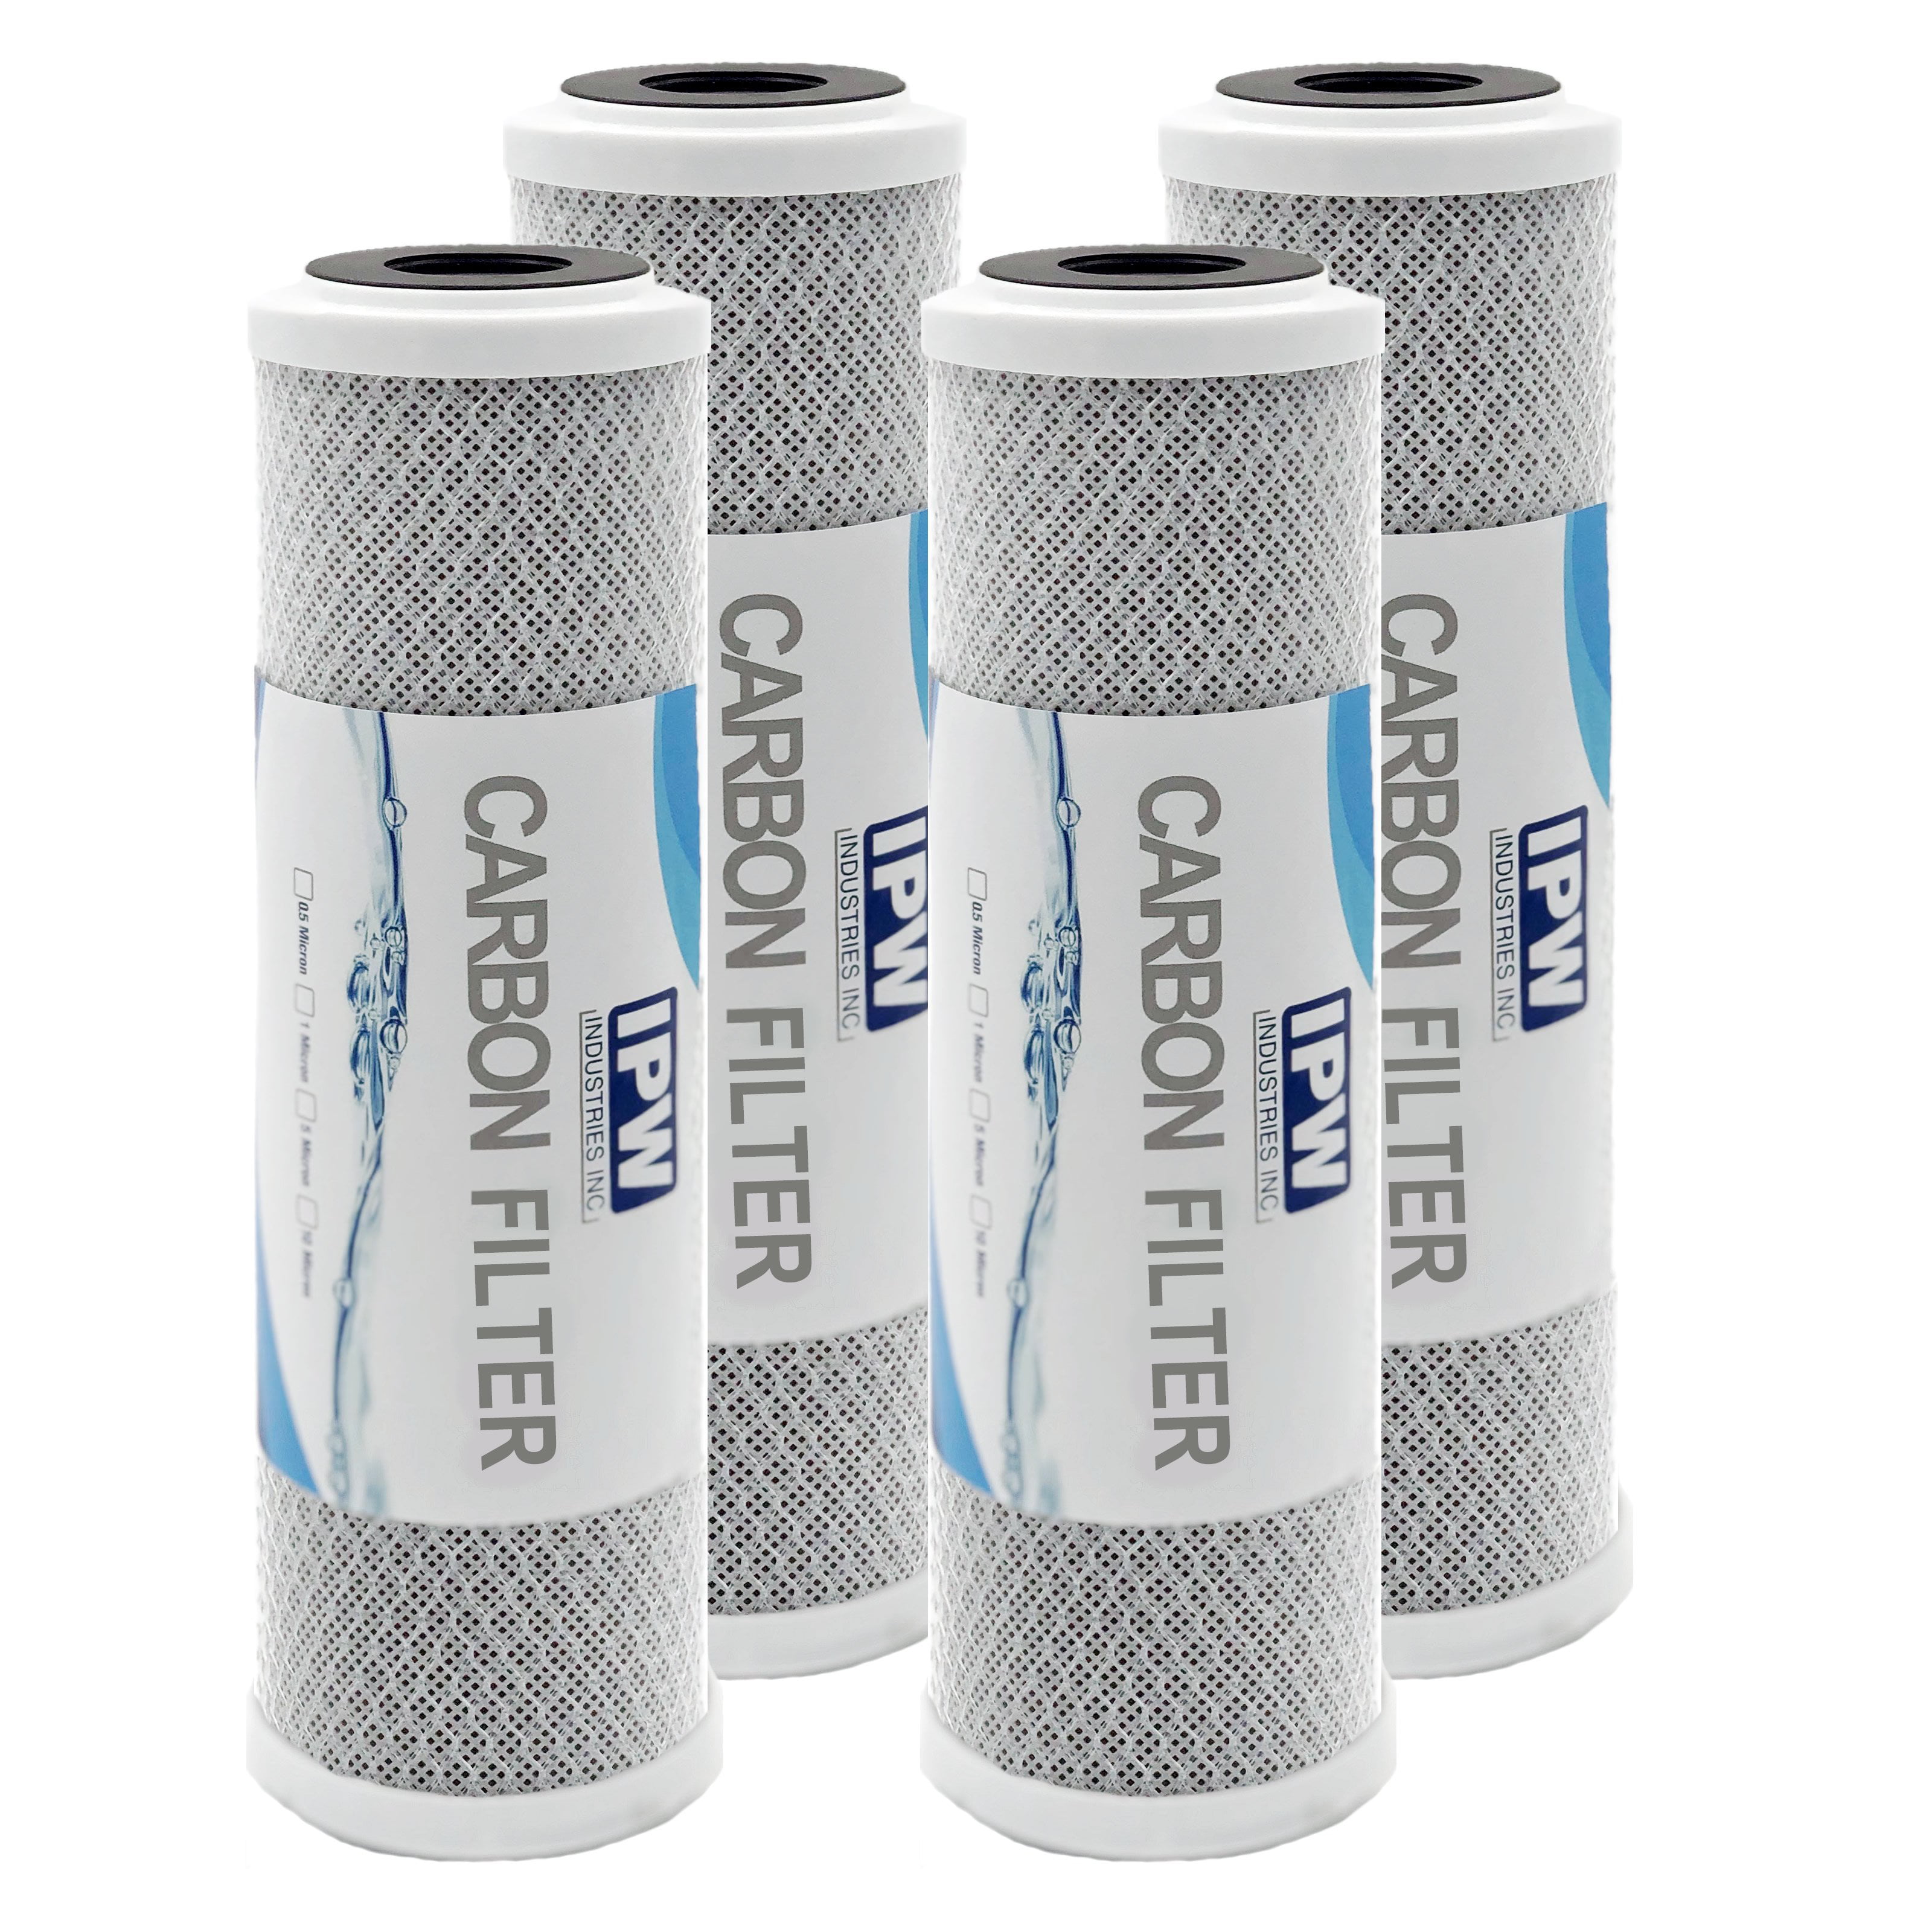 9-3/4 x 2-7/8 IPW Industries Inc 4 Pack 10 Carbon Block Coconut Shell Filter Cartridge 5 Micron Replacement Water Filters 